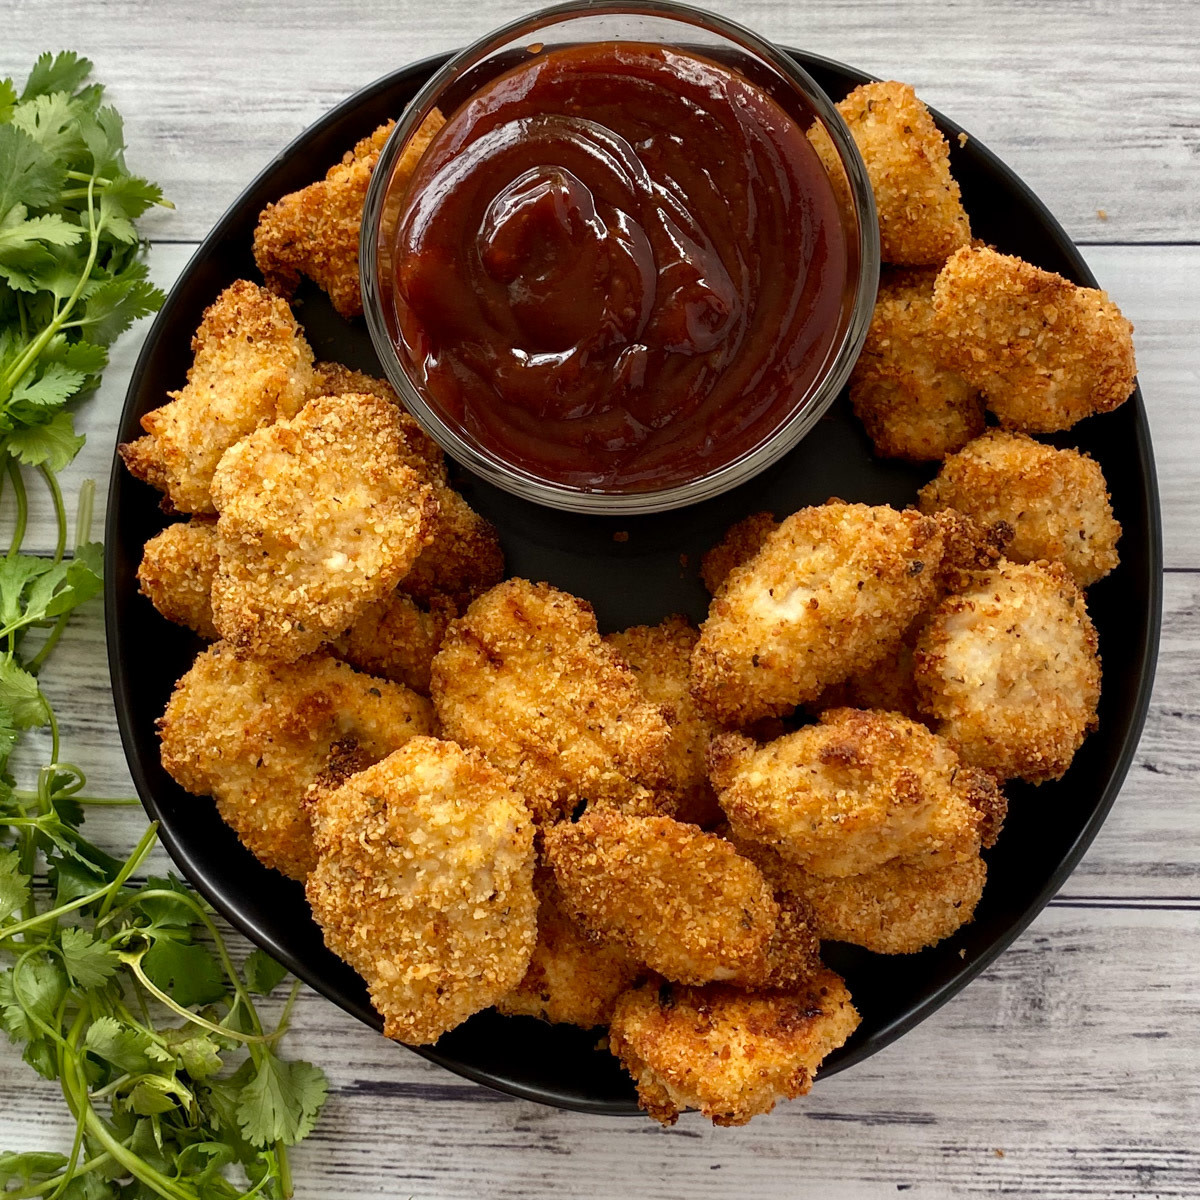 How to Make Delicious Chicken Nuggets at Home (With Photos)